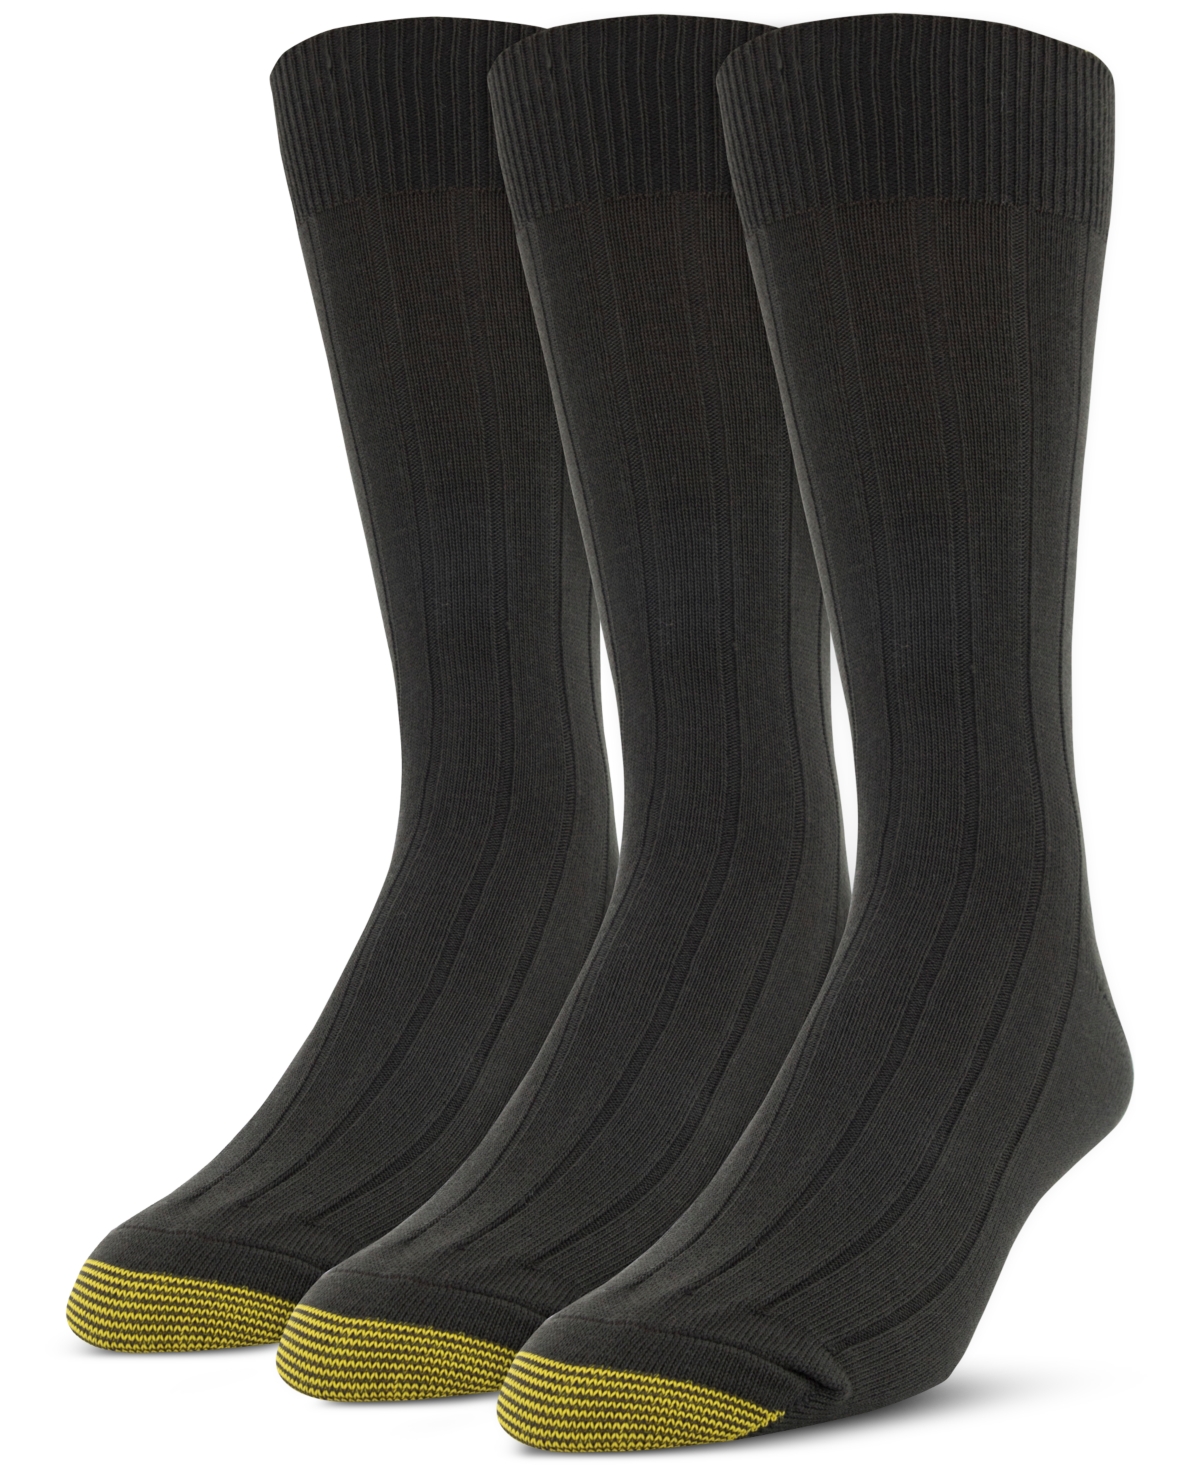 Men's 3- Pack Casual Acrylic Fluffie Socks, Created for Macy's - Black